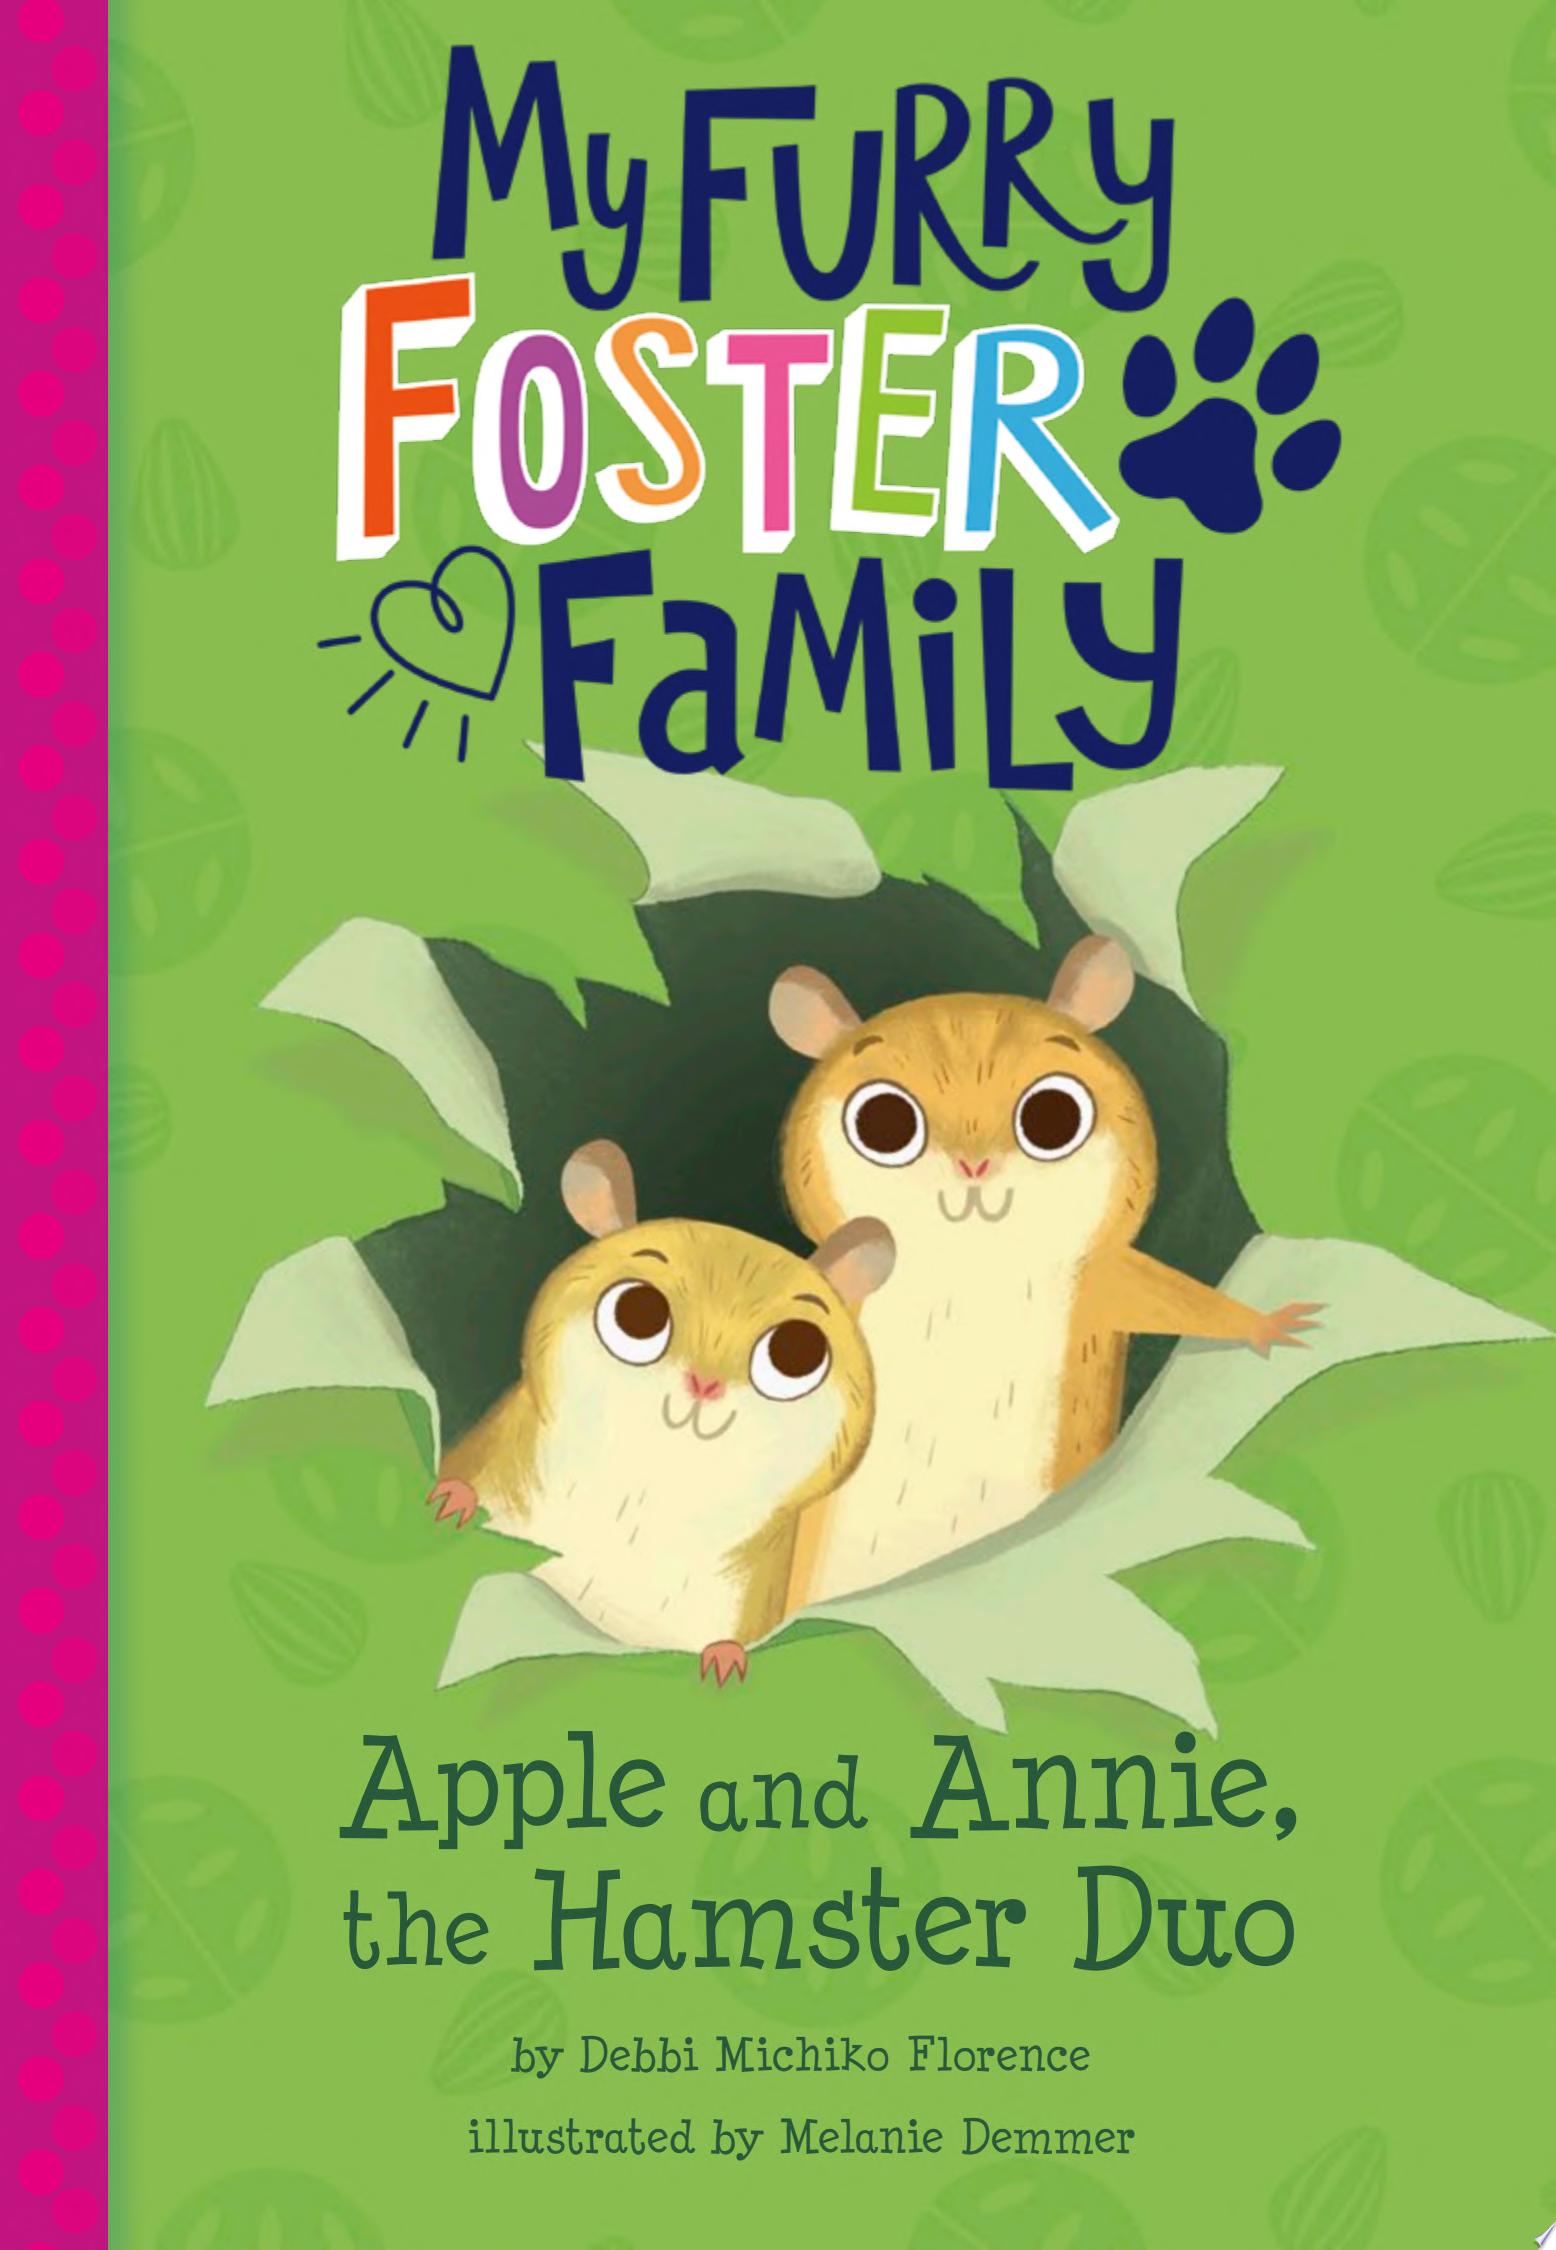 Image for "Apple and Annie, the Hamster Duo"